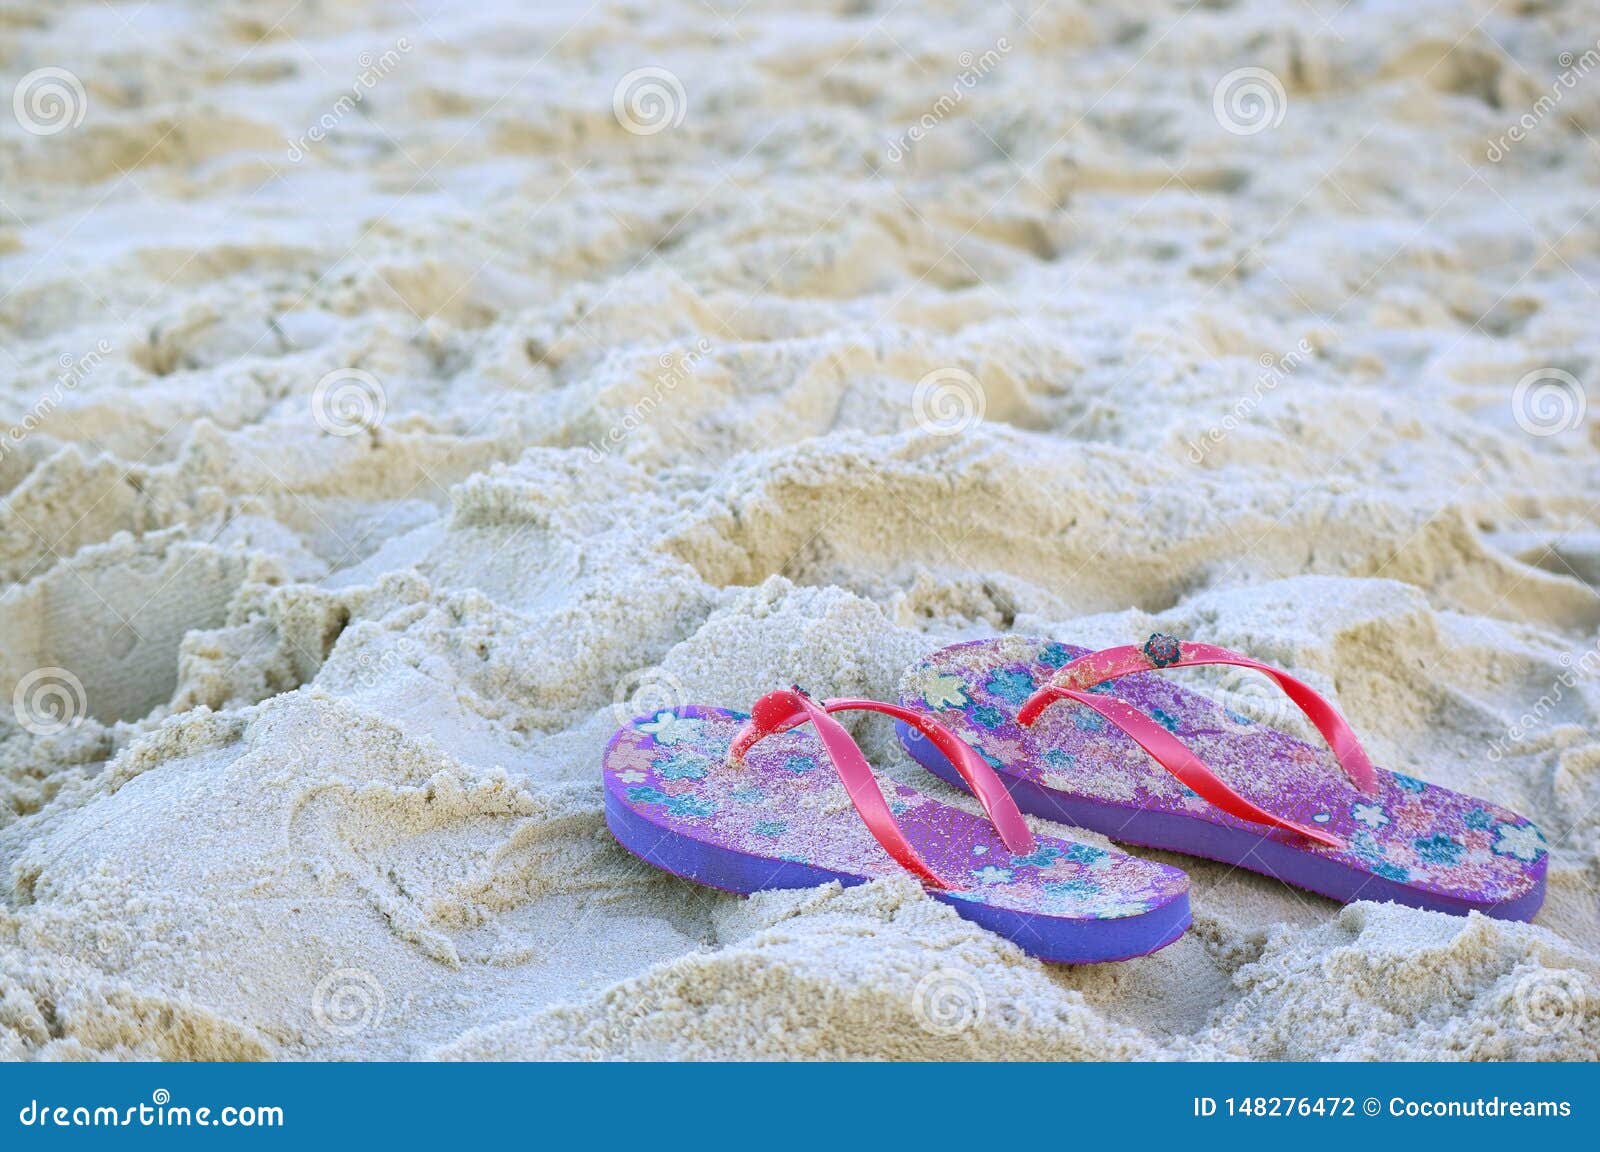 Pair of Vivid Colored Flip-flops Sandals on the Sandy Beach Stock Photo ...